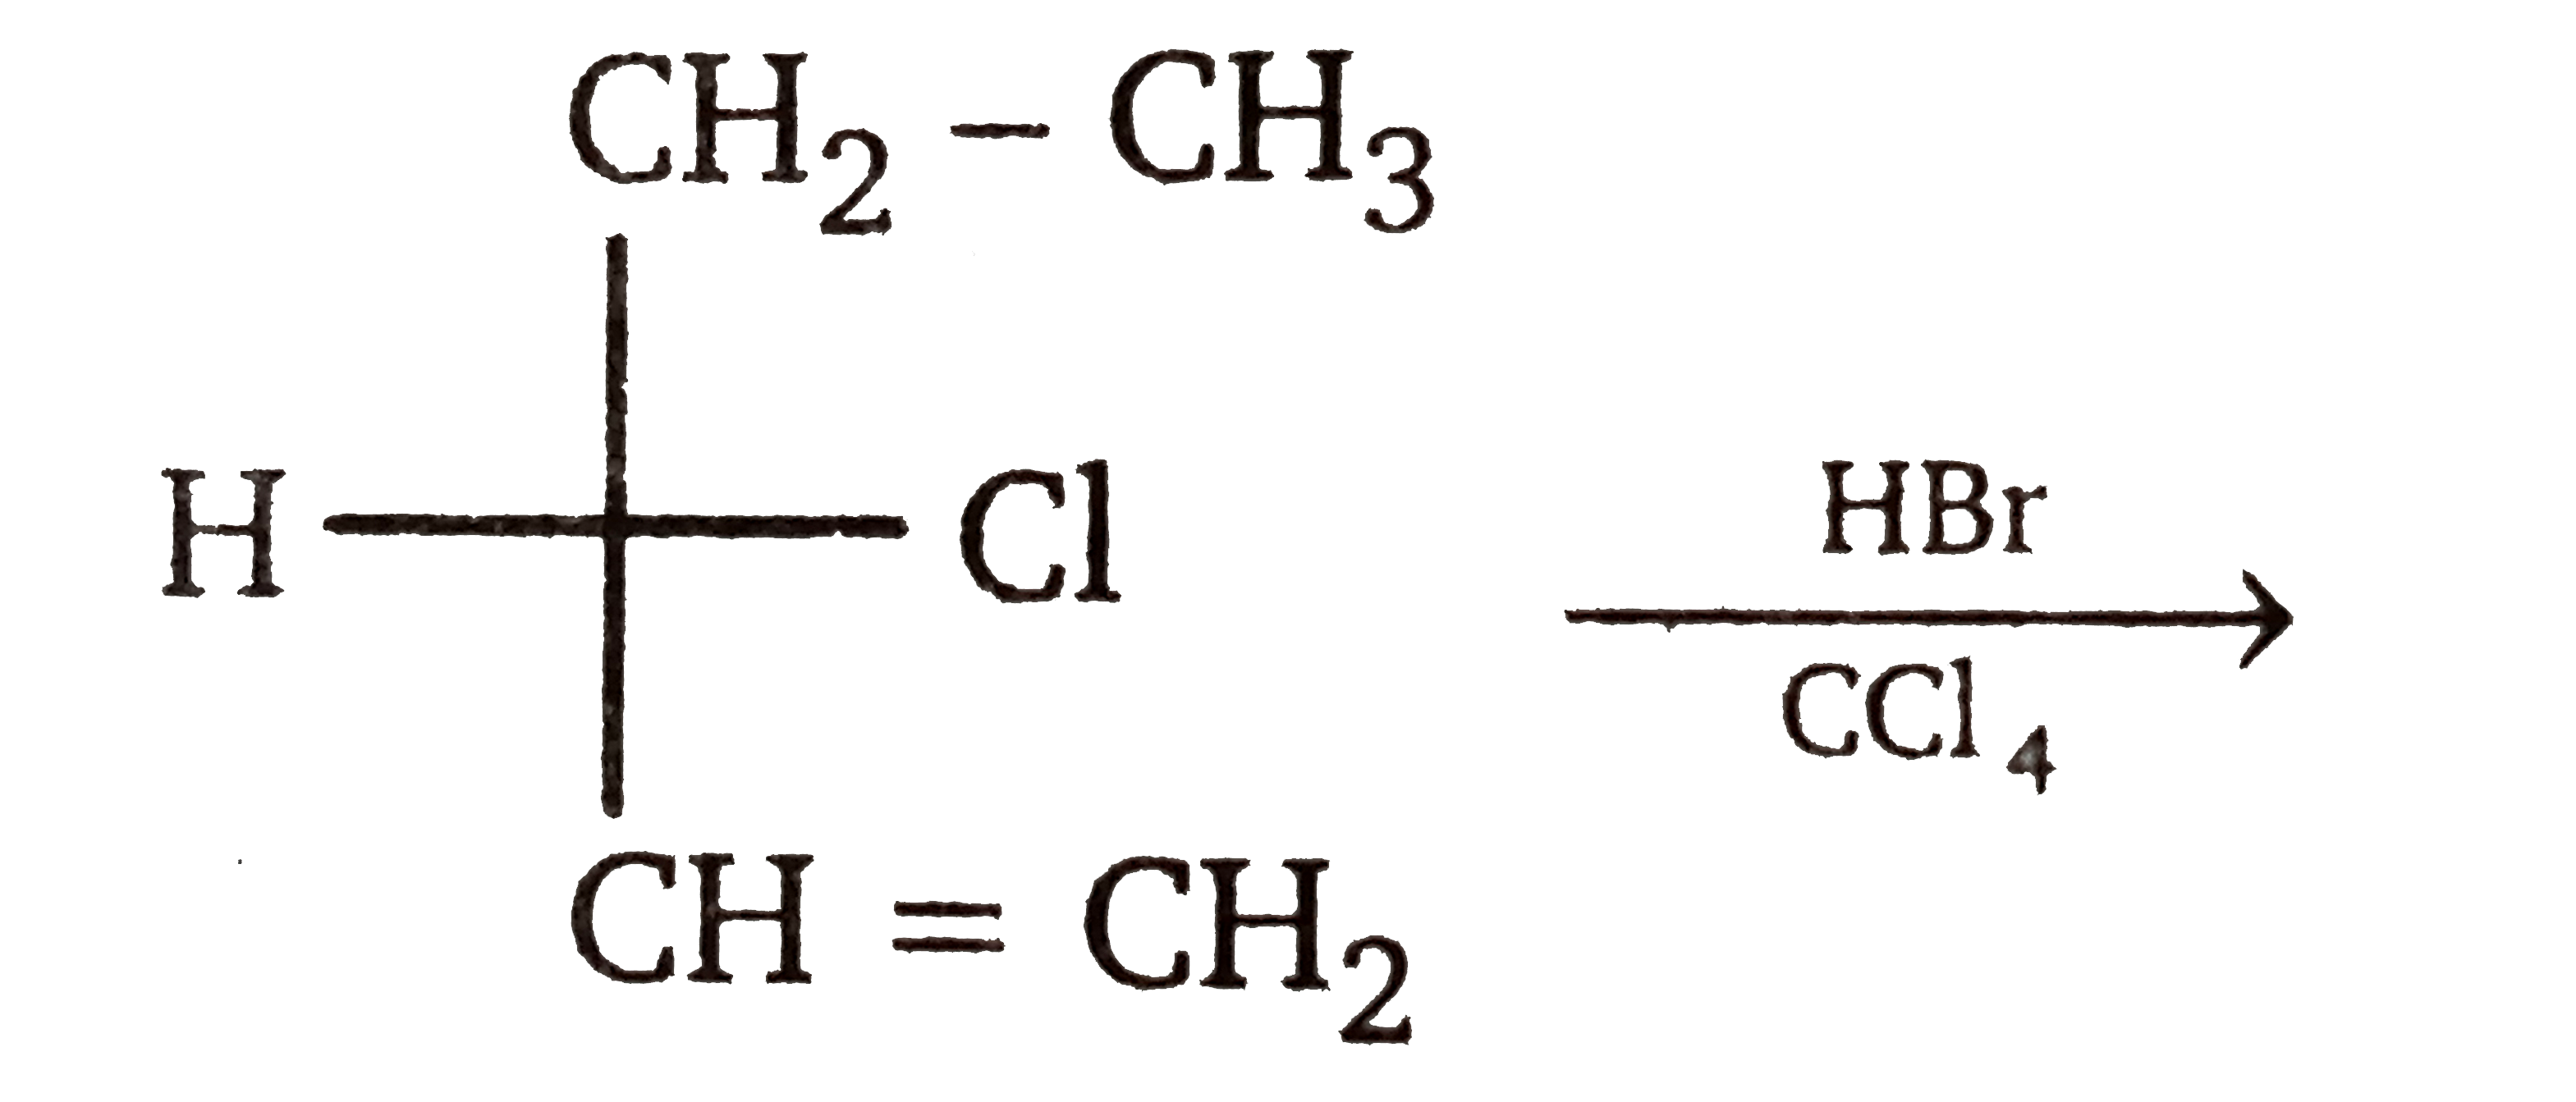 What is stereochemistry of product ?